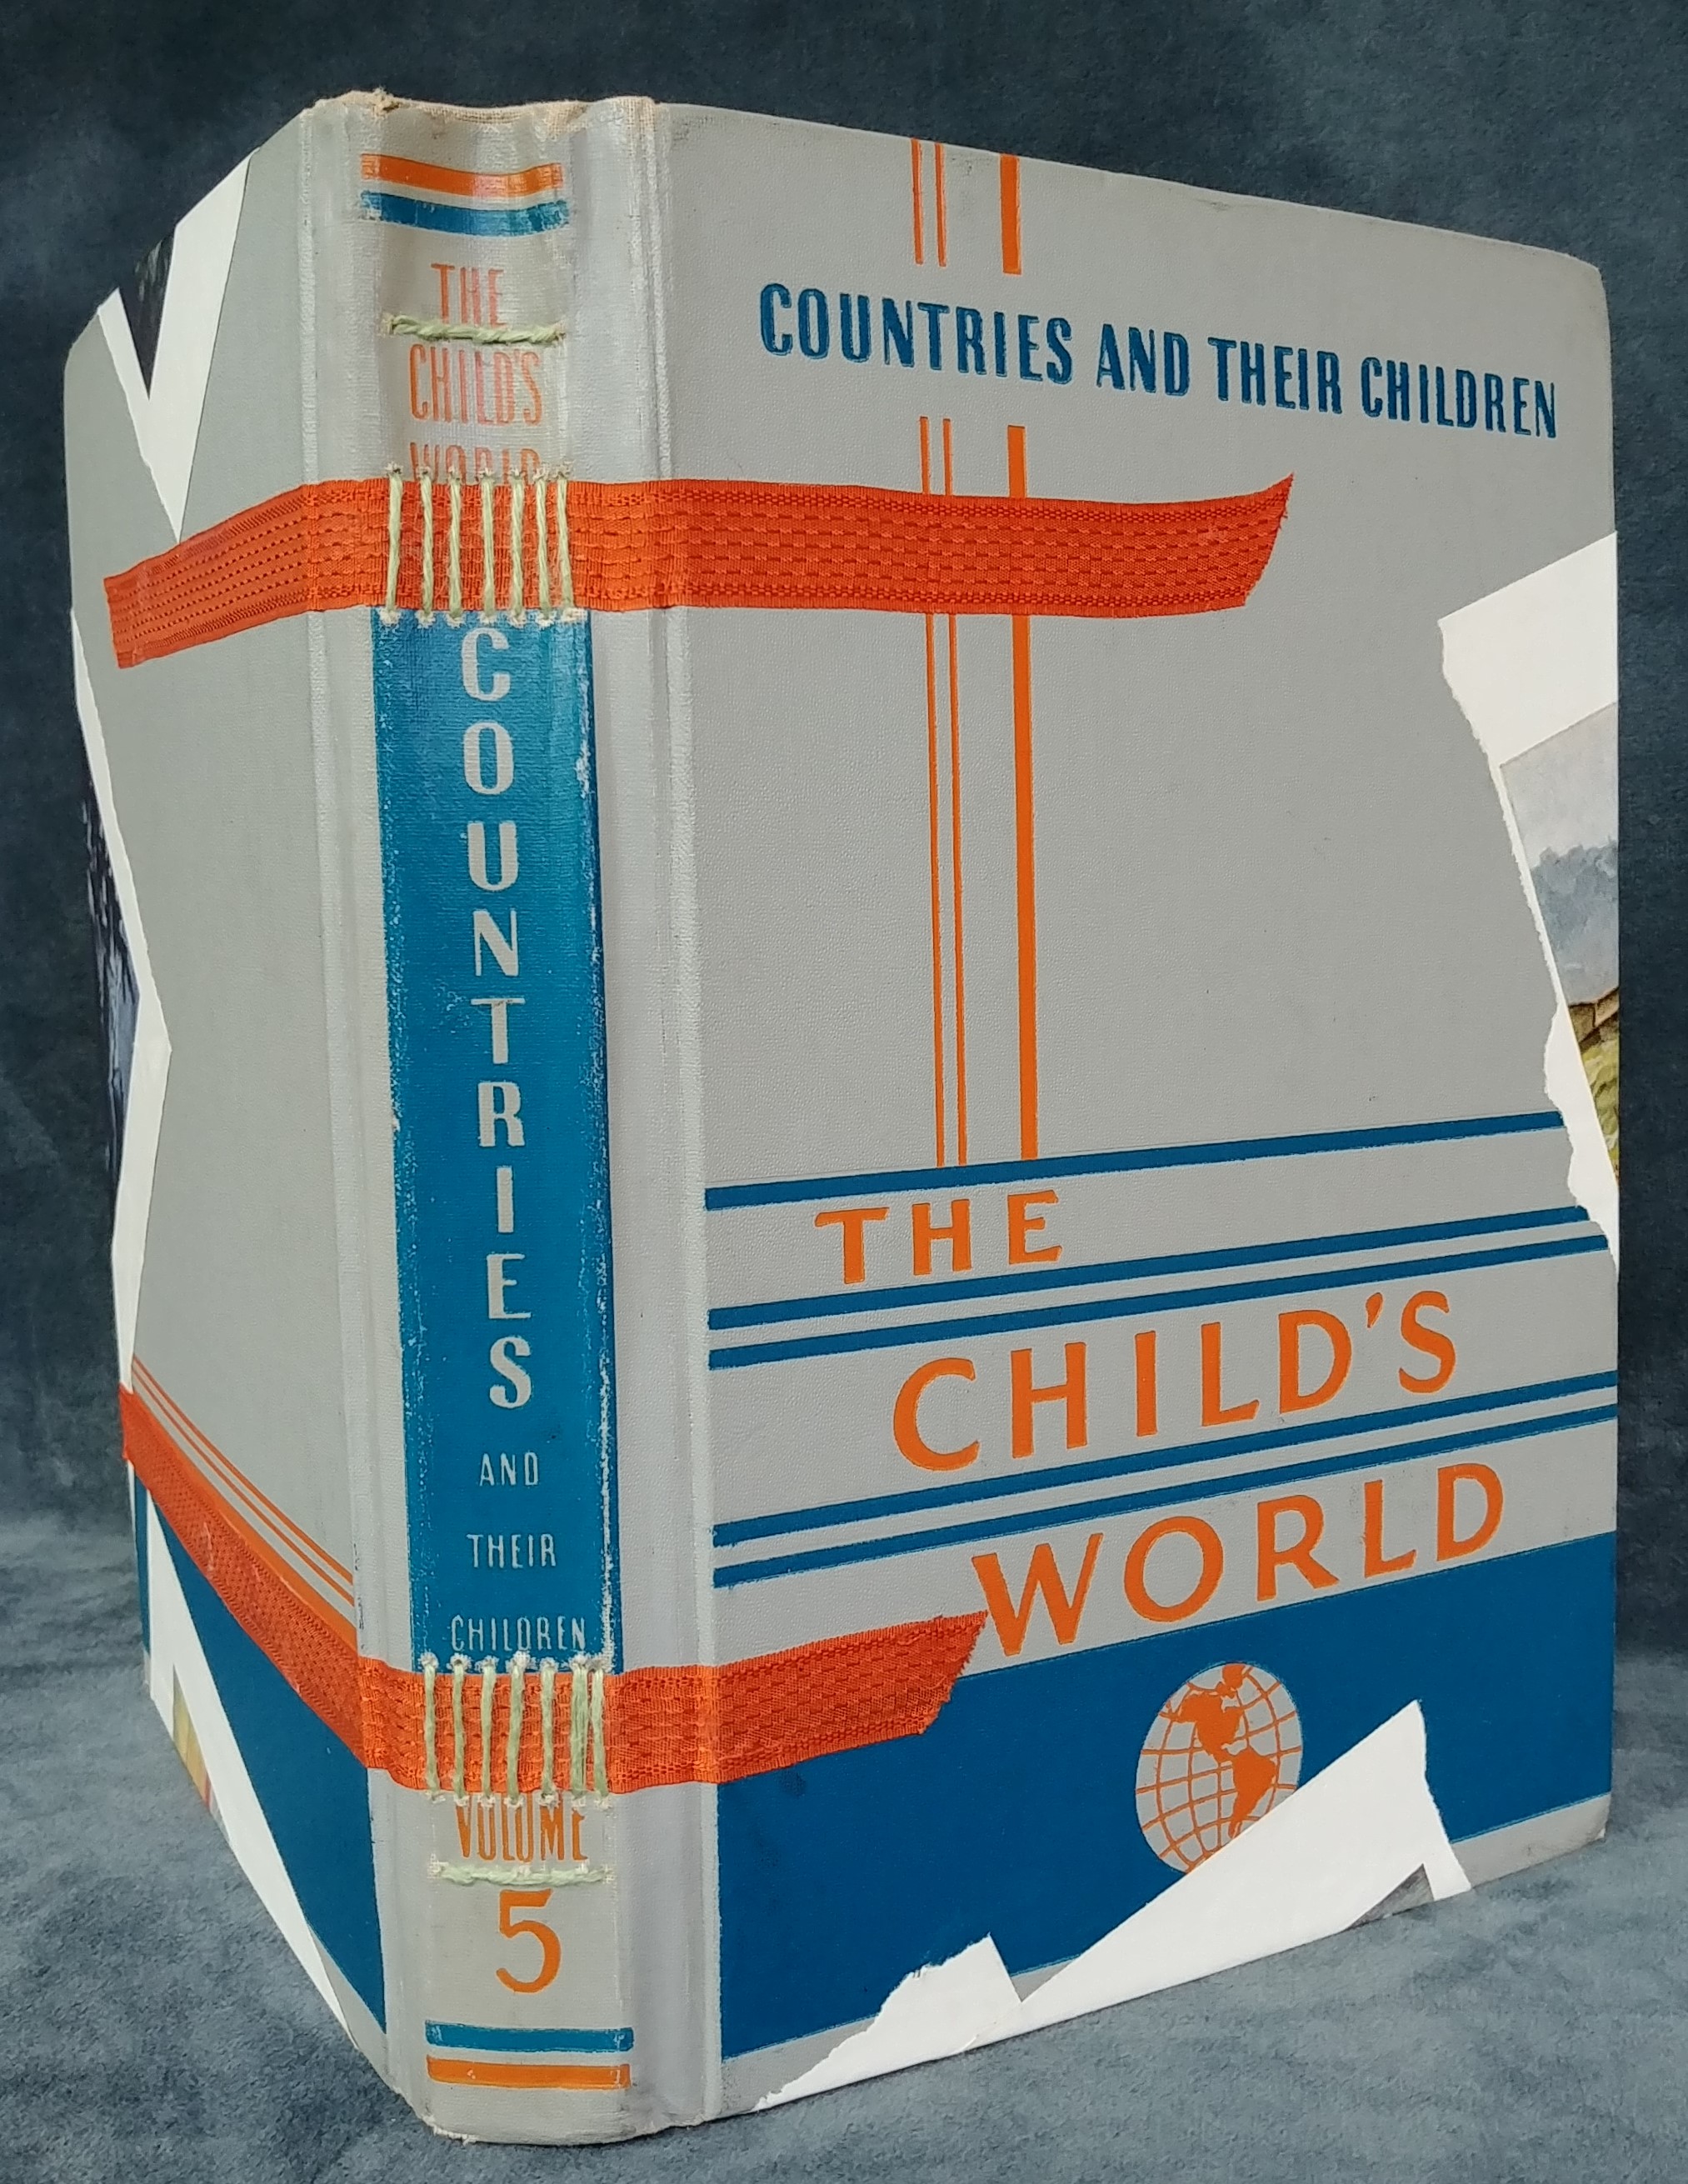 Countries and Their Children outside covers